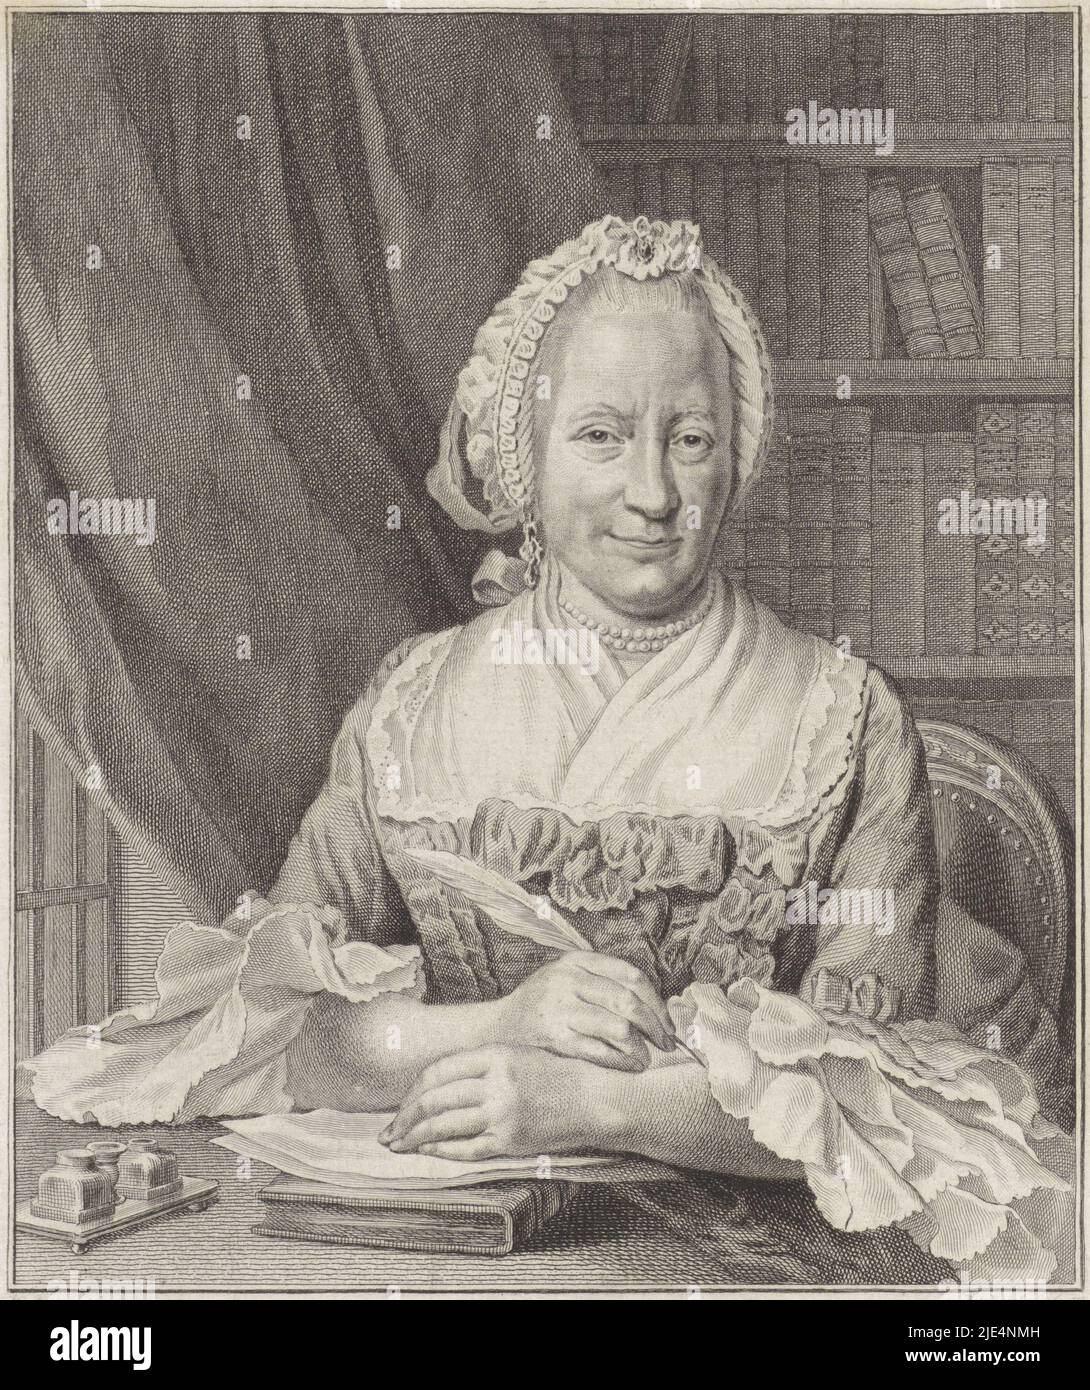 Portrait of the Dutch poet Lucretia Wilhelmina van Merken, sitting in front of a table with for her inkwell, a book and a sheet of paper, in her hand a quill, Portrait of Lucretia Wilhelmina van Merken., print maker: Reinier Vinkeles (I), (mentioned on object), intermediary draughtsman: Hendrik Pothoven, (mentioned on object), Amsterdam, 1792, paper, etching, engraving, h 192 mm × w 143 mm Stock Photo